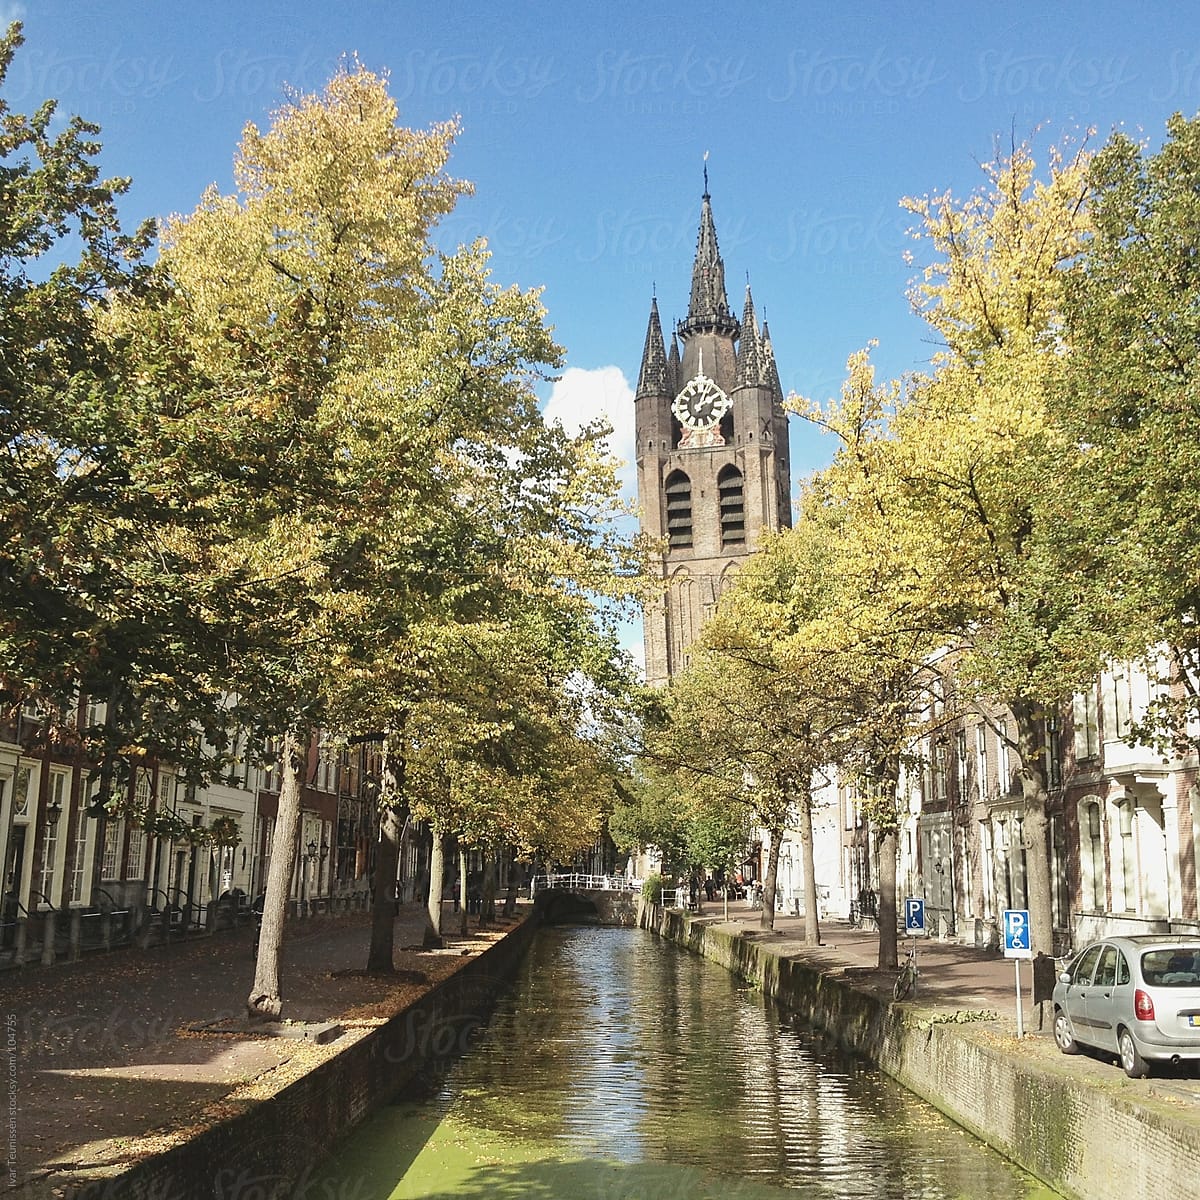 Old church and canal in Delft